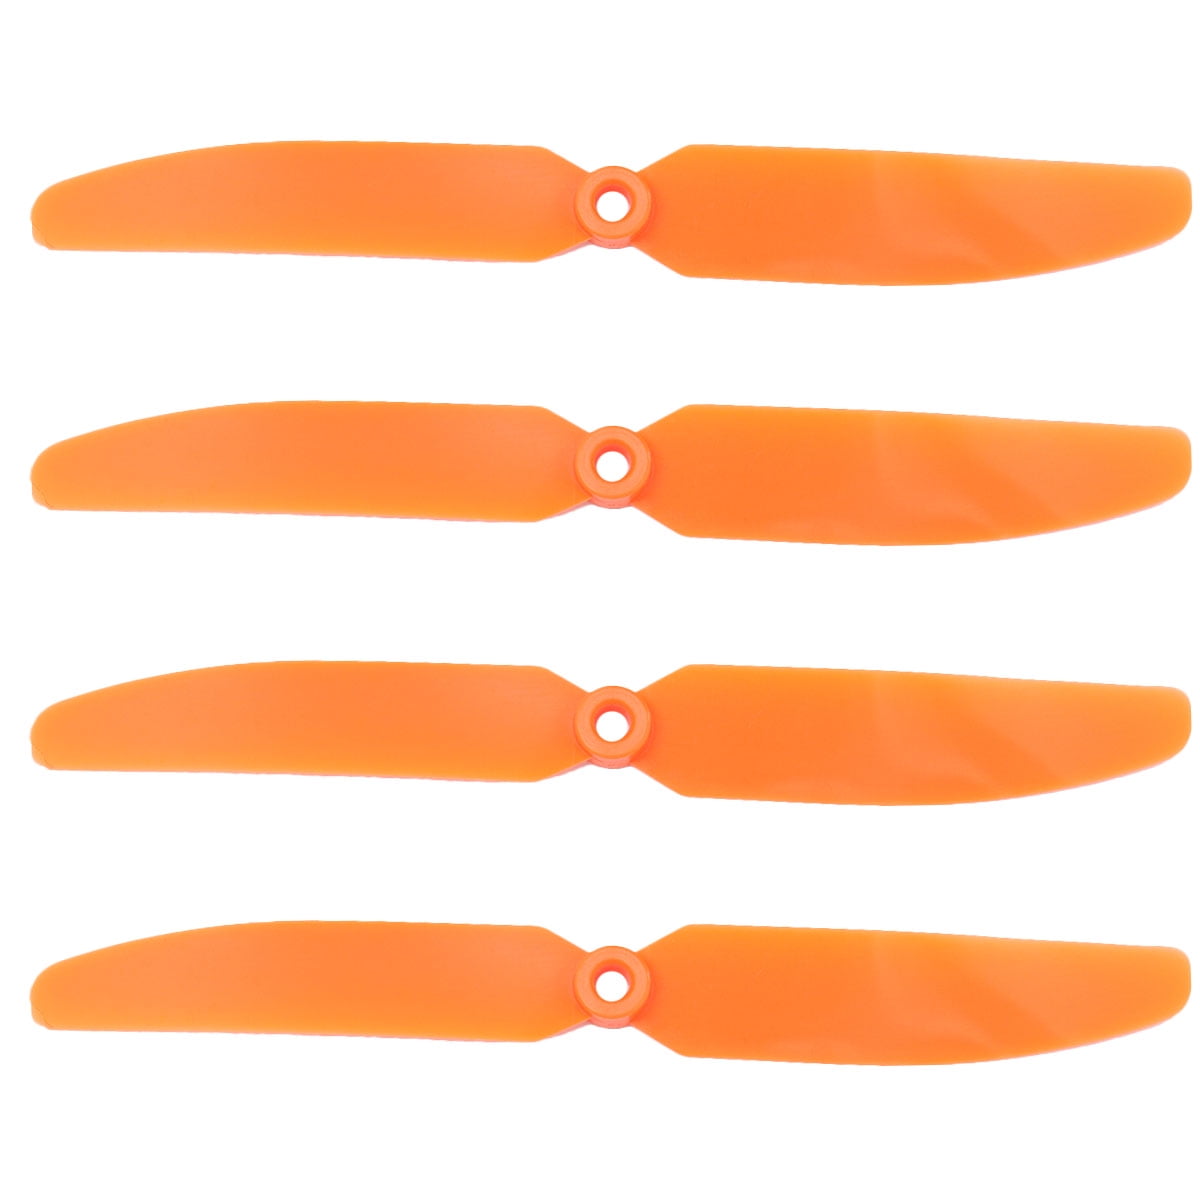 Lot of 5 RC Airplane Accessories Wood Super Dynamite 8 12 Propellers